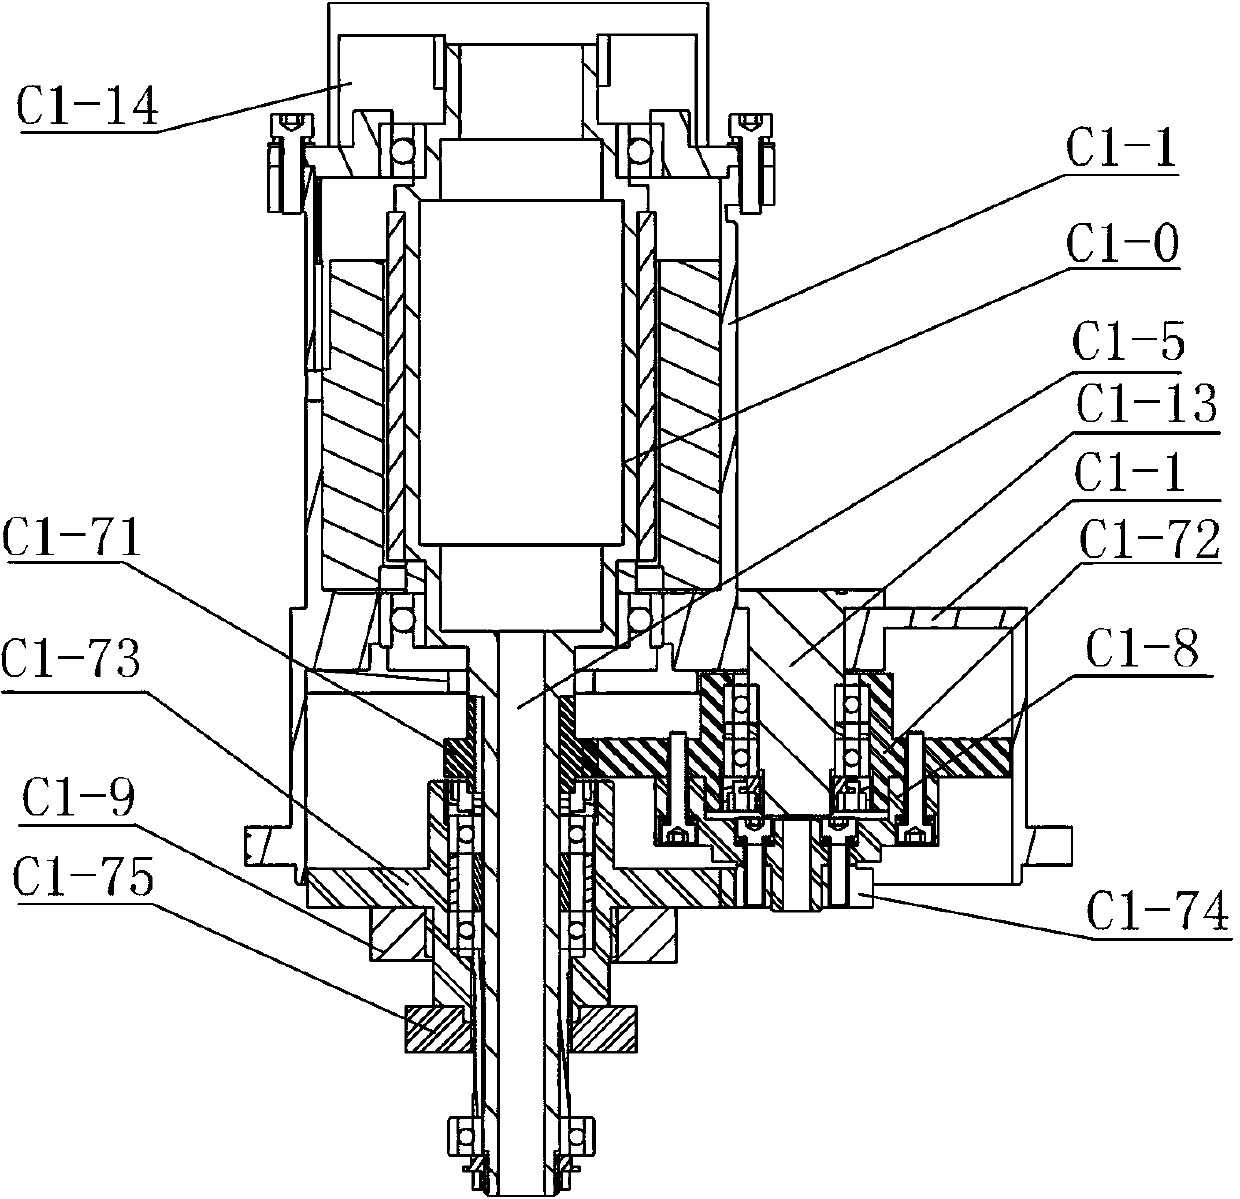 End effector capable of achieving space manipulator self crawling and load operation